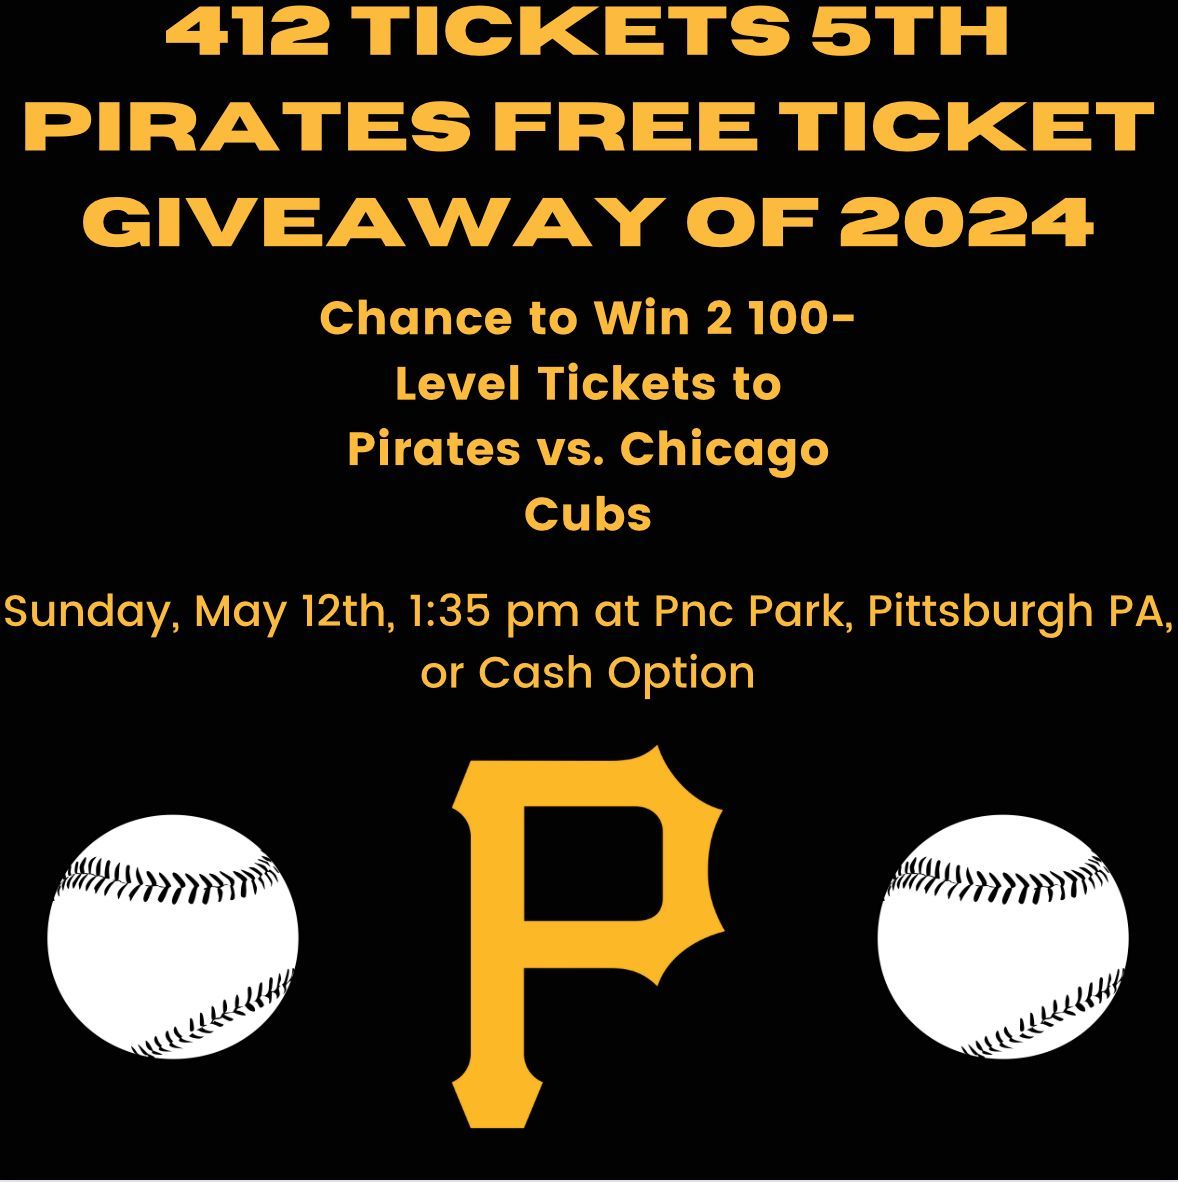 #PiratesFreeTicketGiveaway Chance to win 2 Free 100 Level Tickets to #Pirates vs #Cubs on Sun. 5/12 at 1:35pm or $25 via Cash App/Paypal Giveaway starts Now ends Mon 5/6 at 11:59pm EST Follow, RP & TAG FRIENDS Enter on our FB & IG @412Tickets too Winner agrees not to Resale Tix